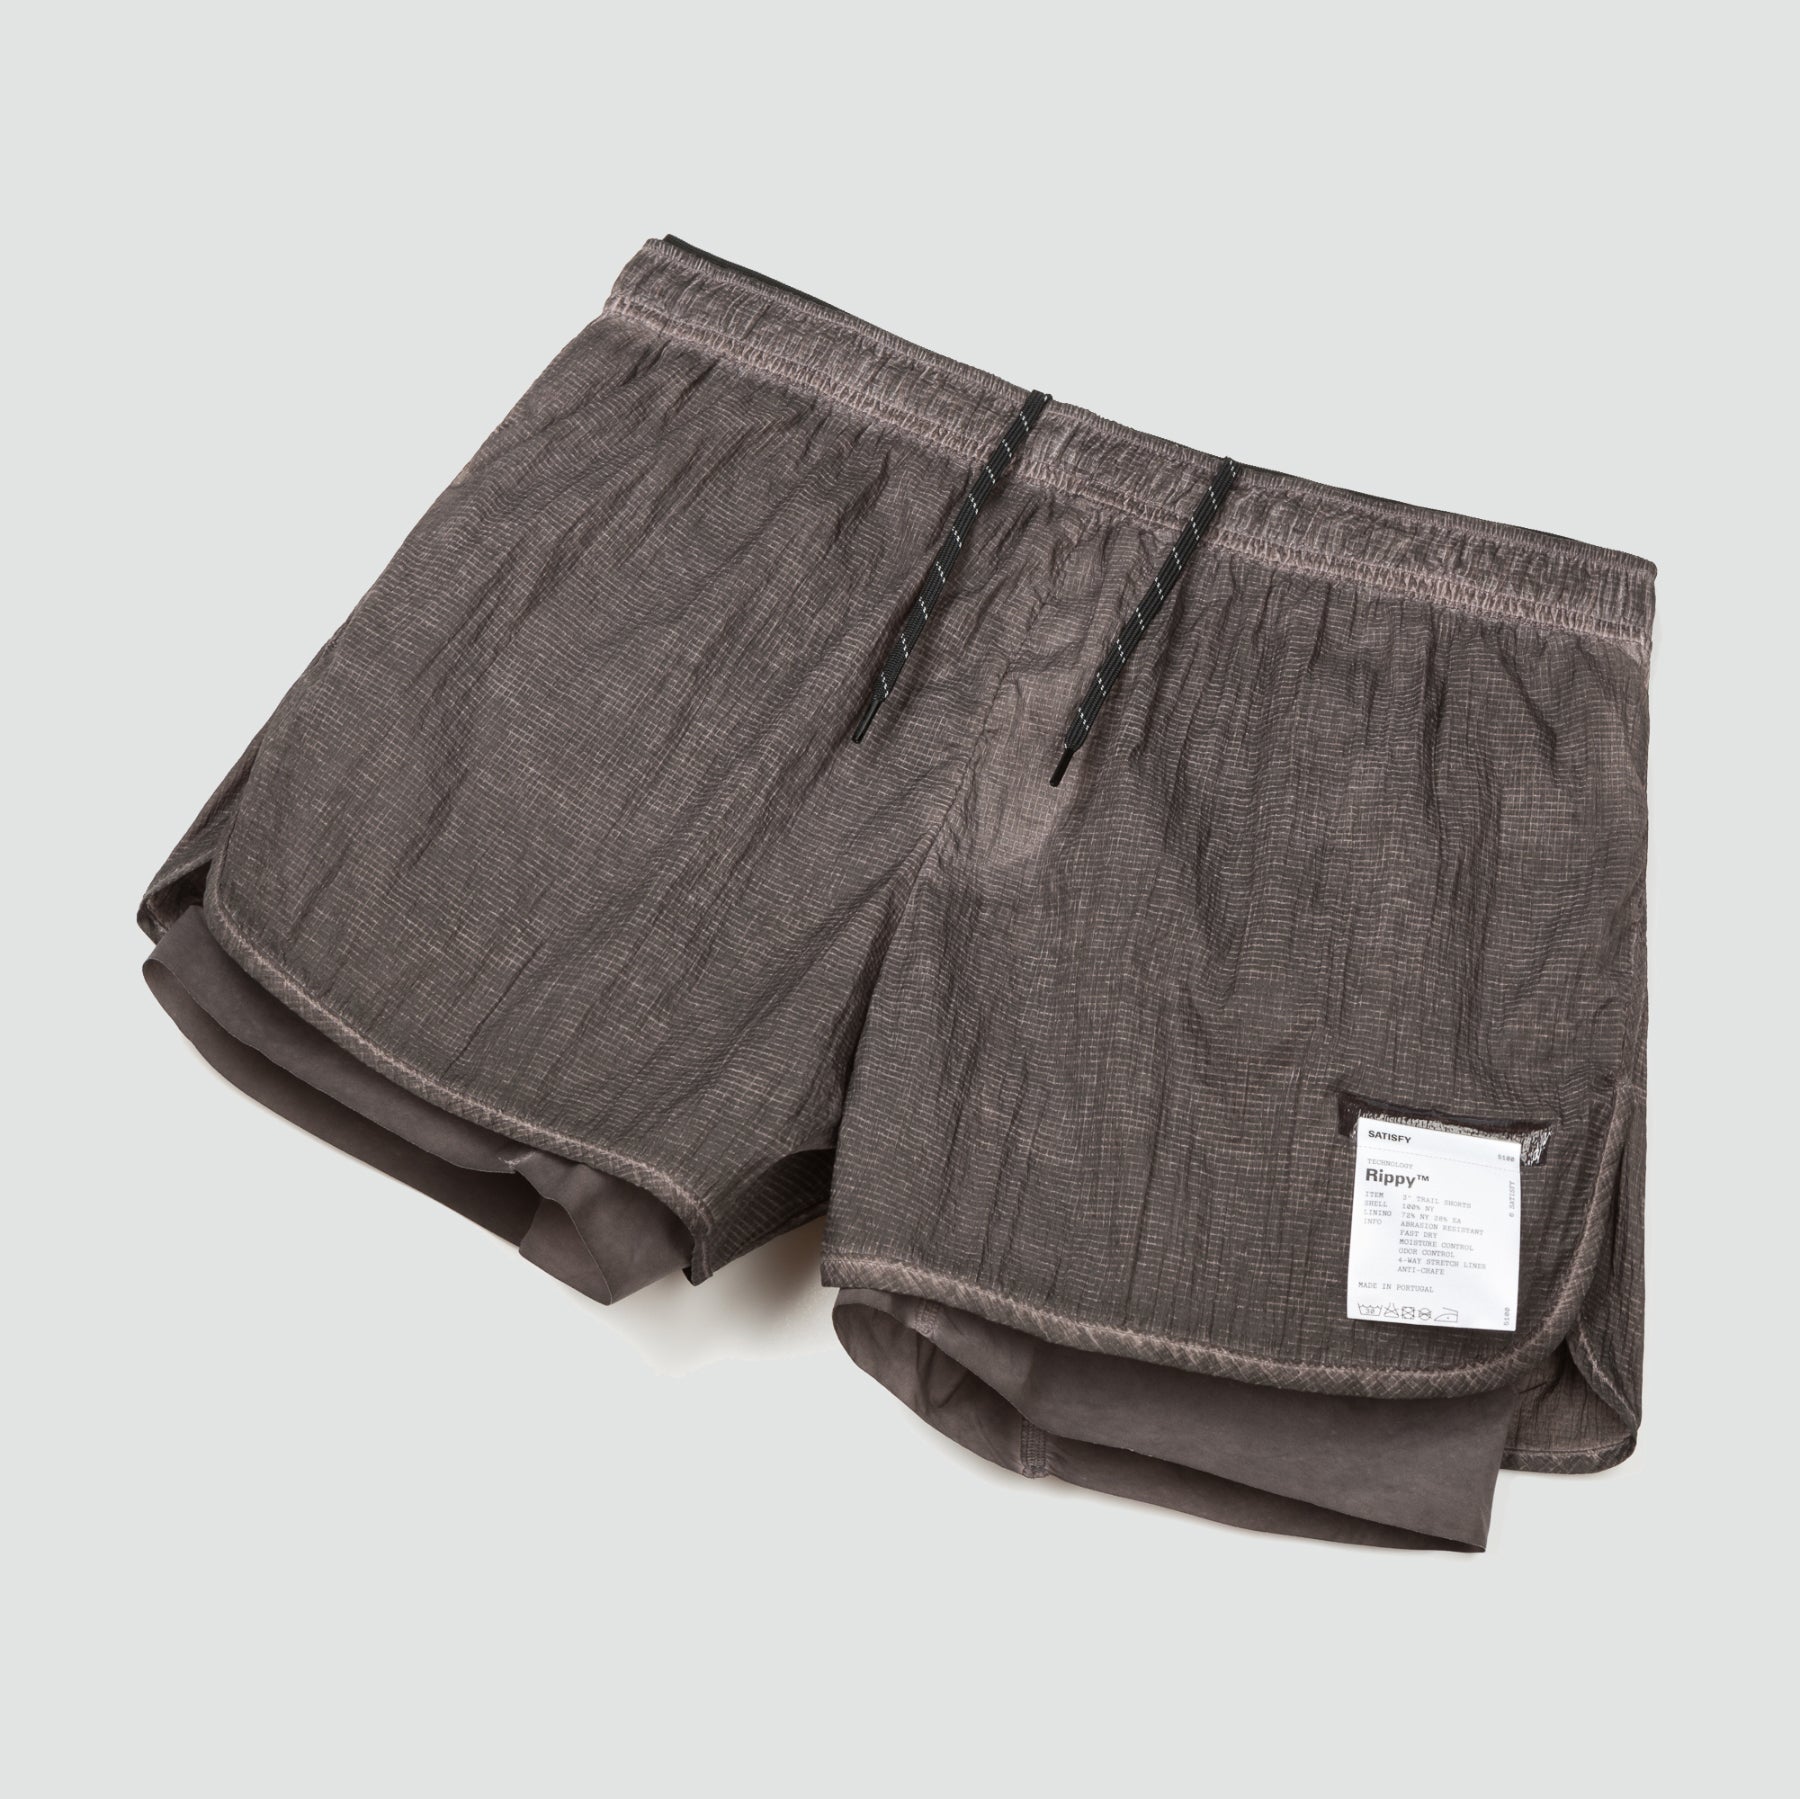 Boxer shorts in French linen made in Portugal